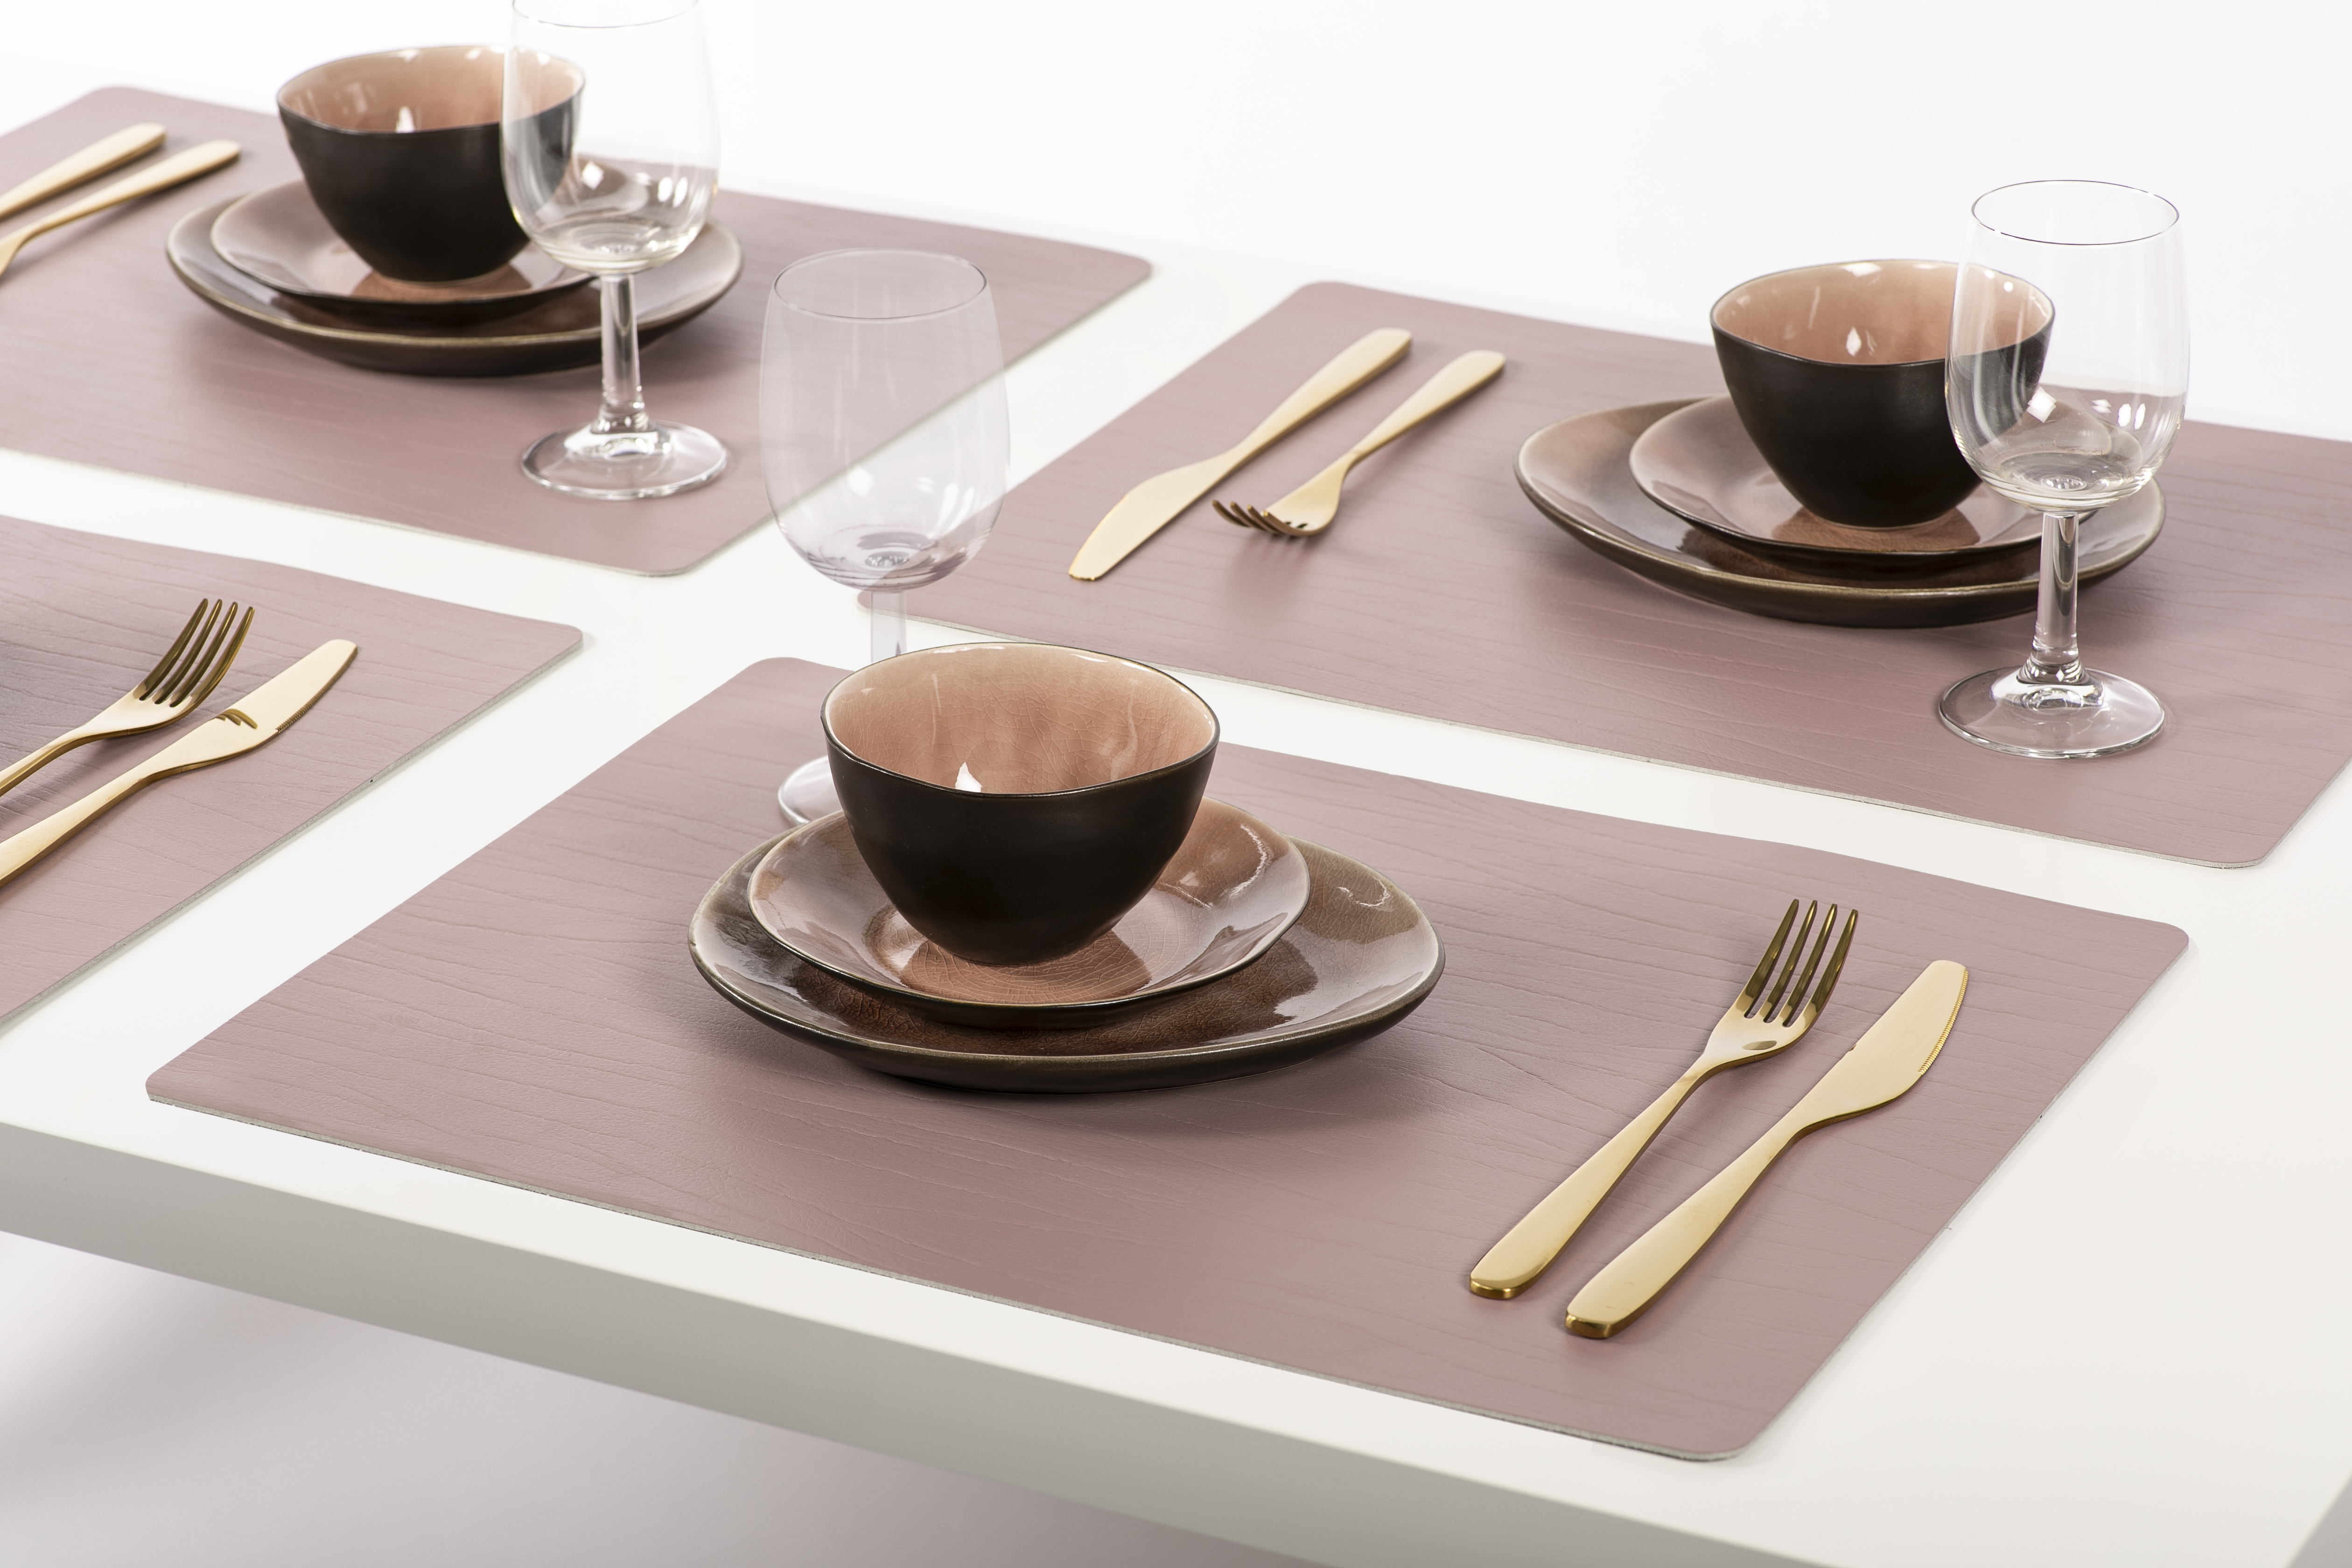 Titan placemat rectangular, 33x45cm, brown double sided